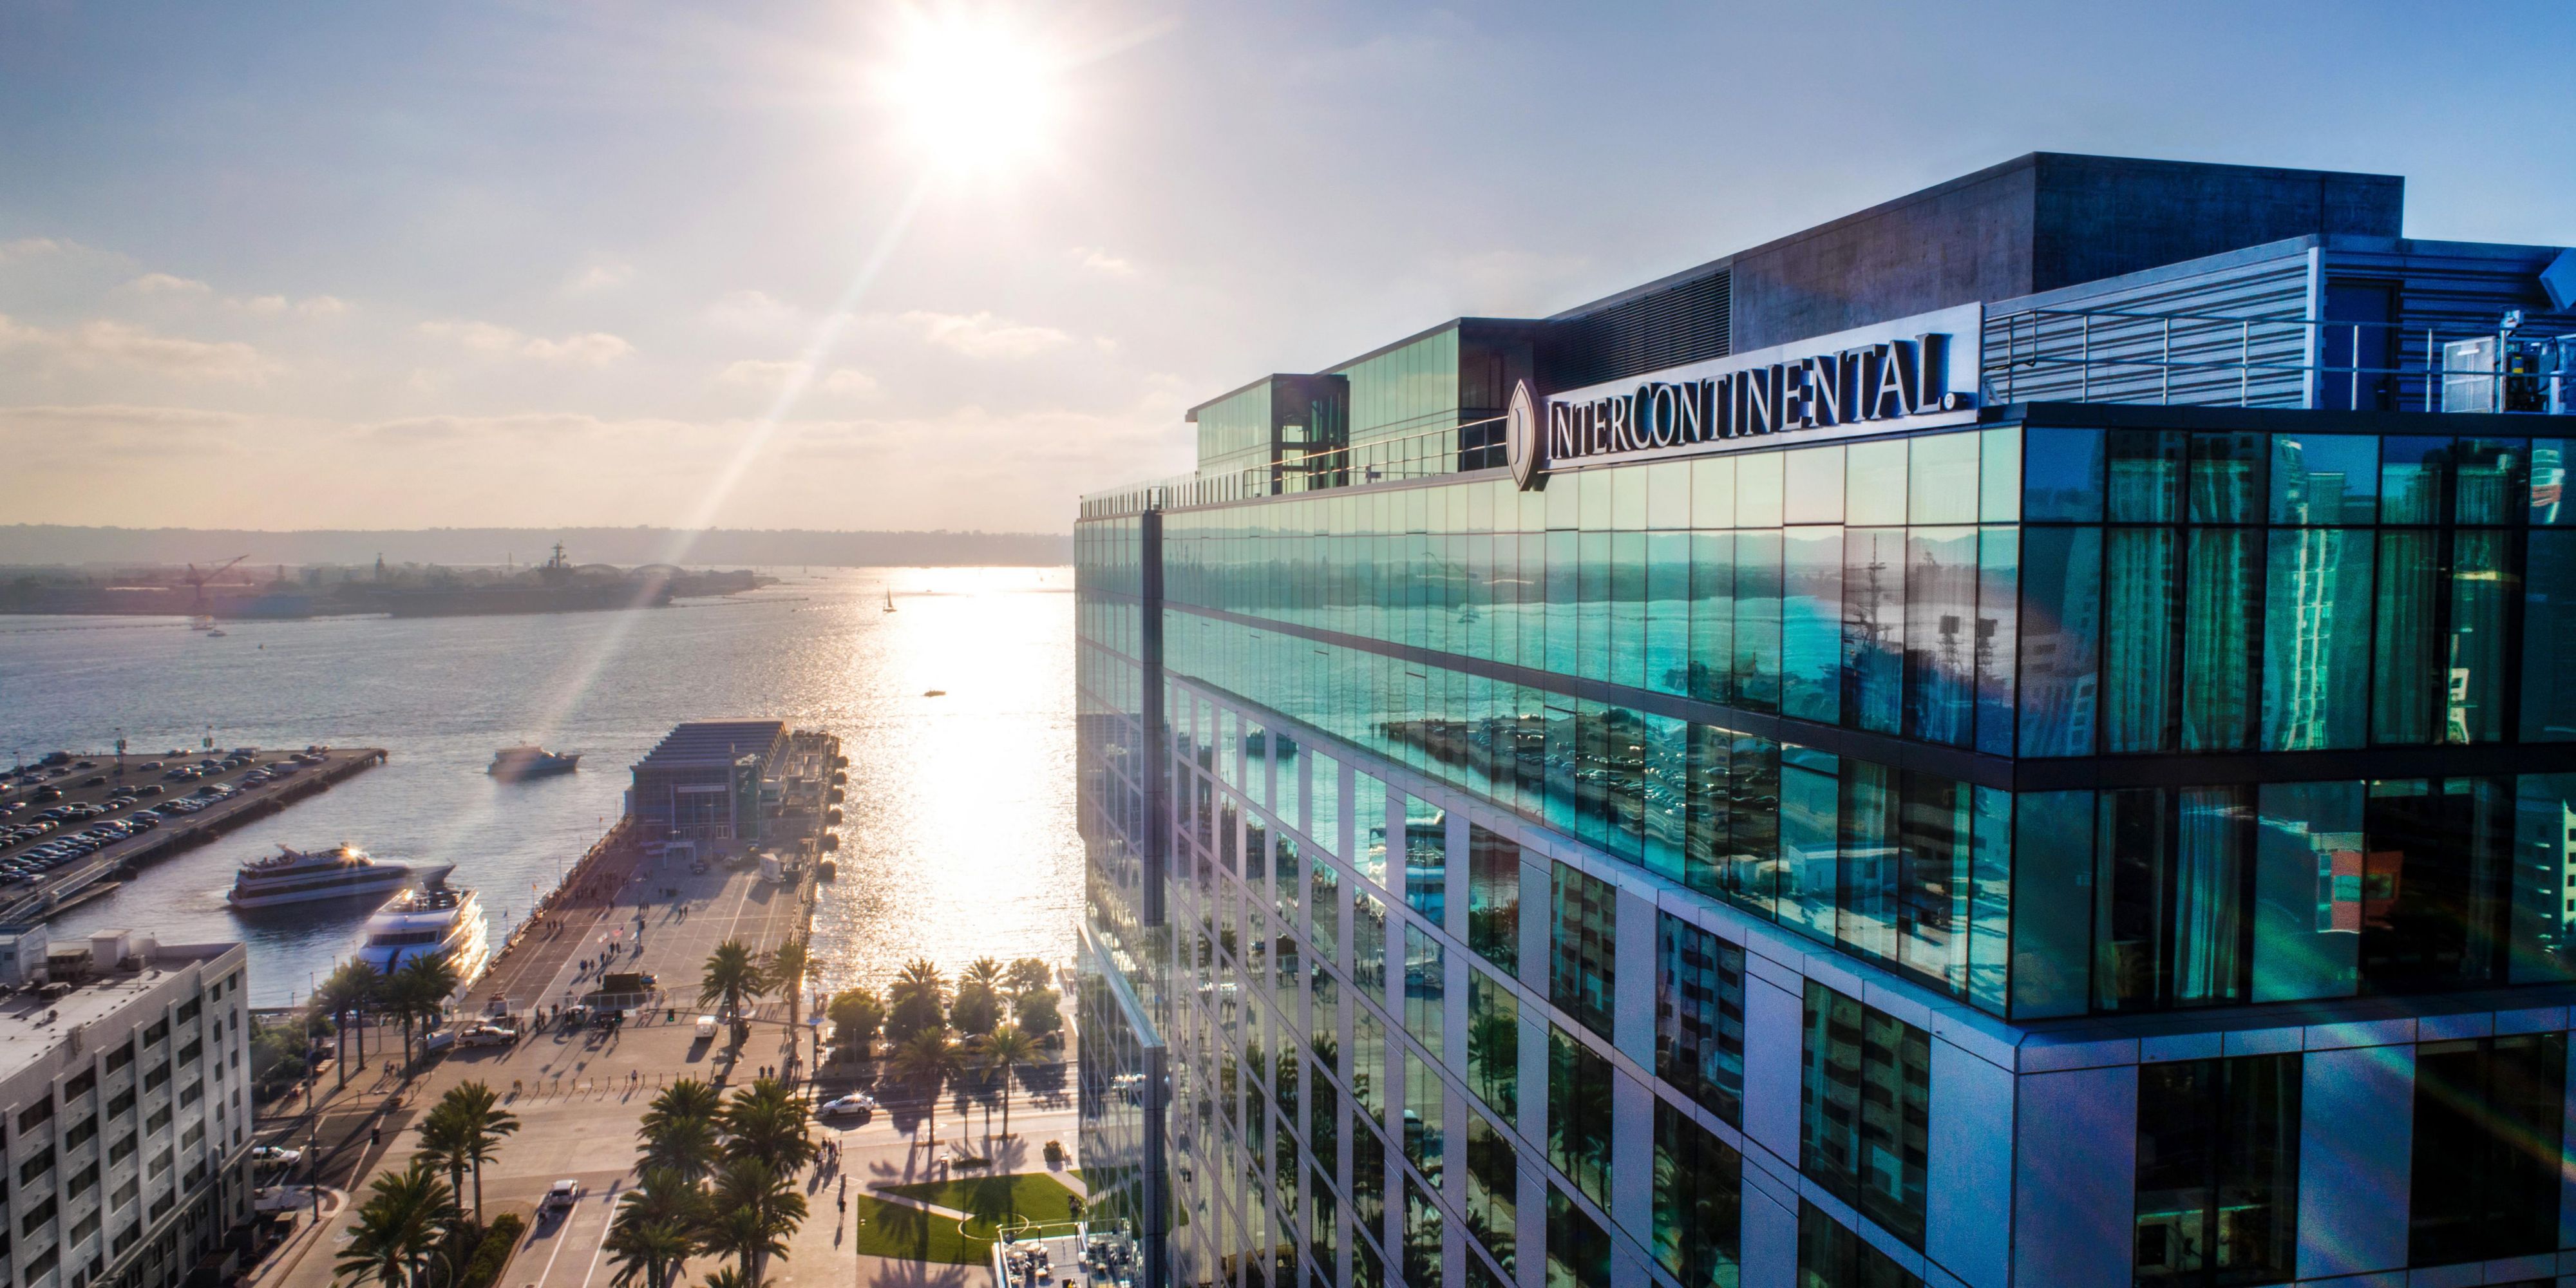 Located in the heart of San Diego, our waterfront hotel offers exceptional city and ocean views. Marvel at the beautiful sunset and watch colors dance across the Pacific or take in the sparkling skyline — all from the floor-to-ceiling windows in the privacy of your pet-friendly room.
